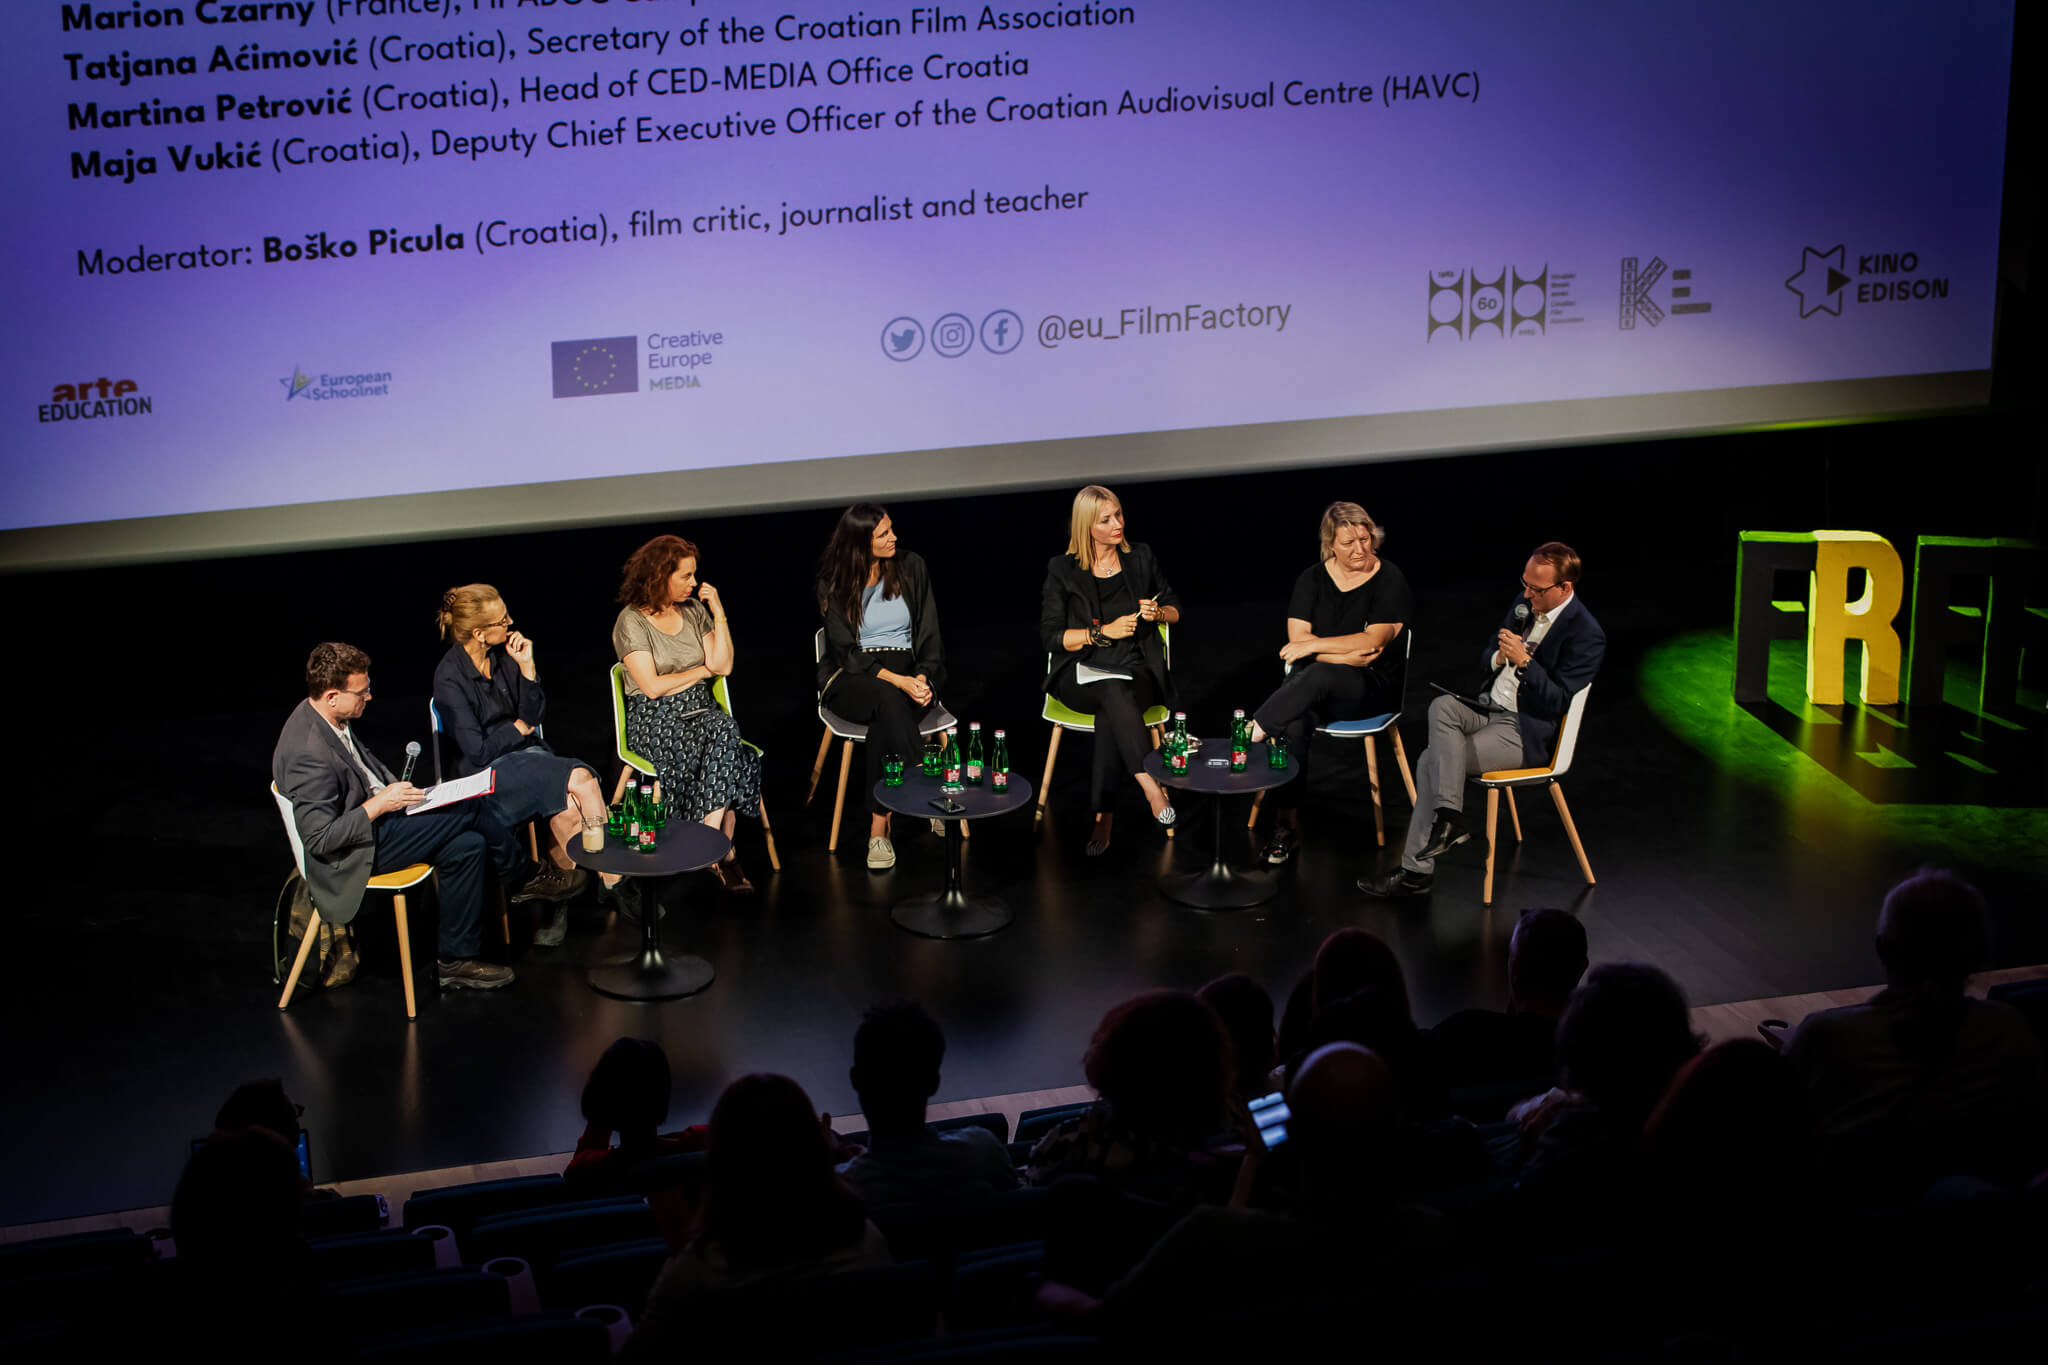 A Panel Discussion on Film Literacy in Schools Held as Part of the European Film Factory and the Four River Film Festival Symposium